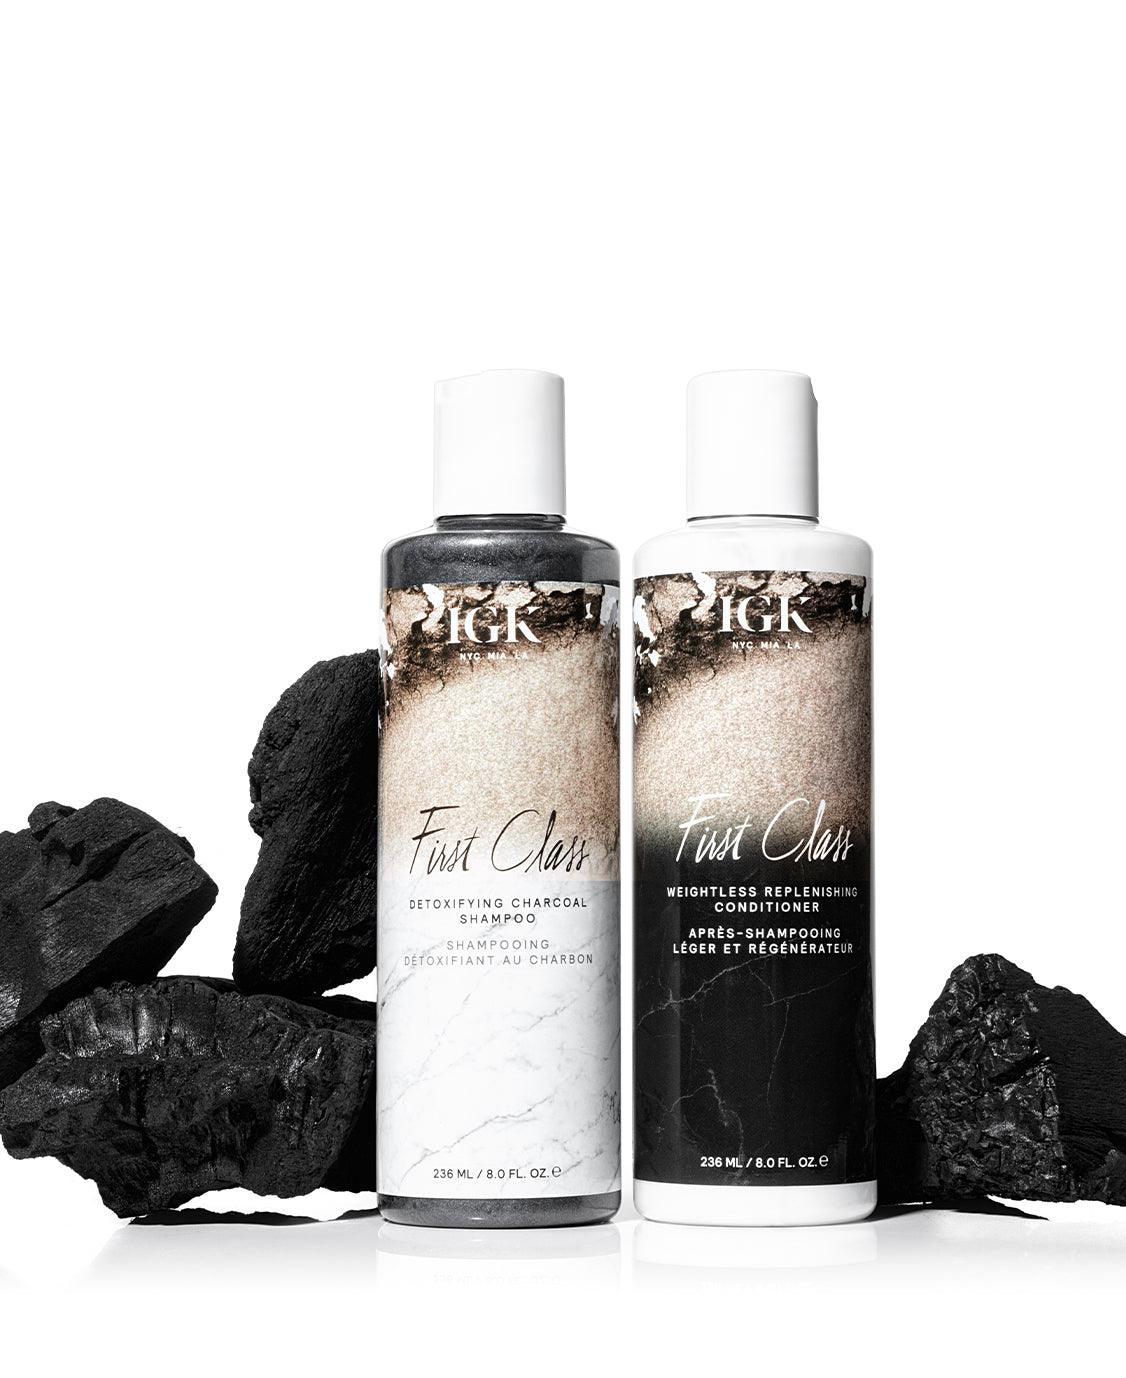 FIRST CLASS Charcoal Detox Clarifying Shampoo - The Coloroom 